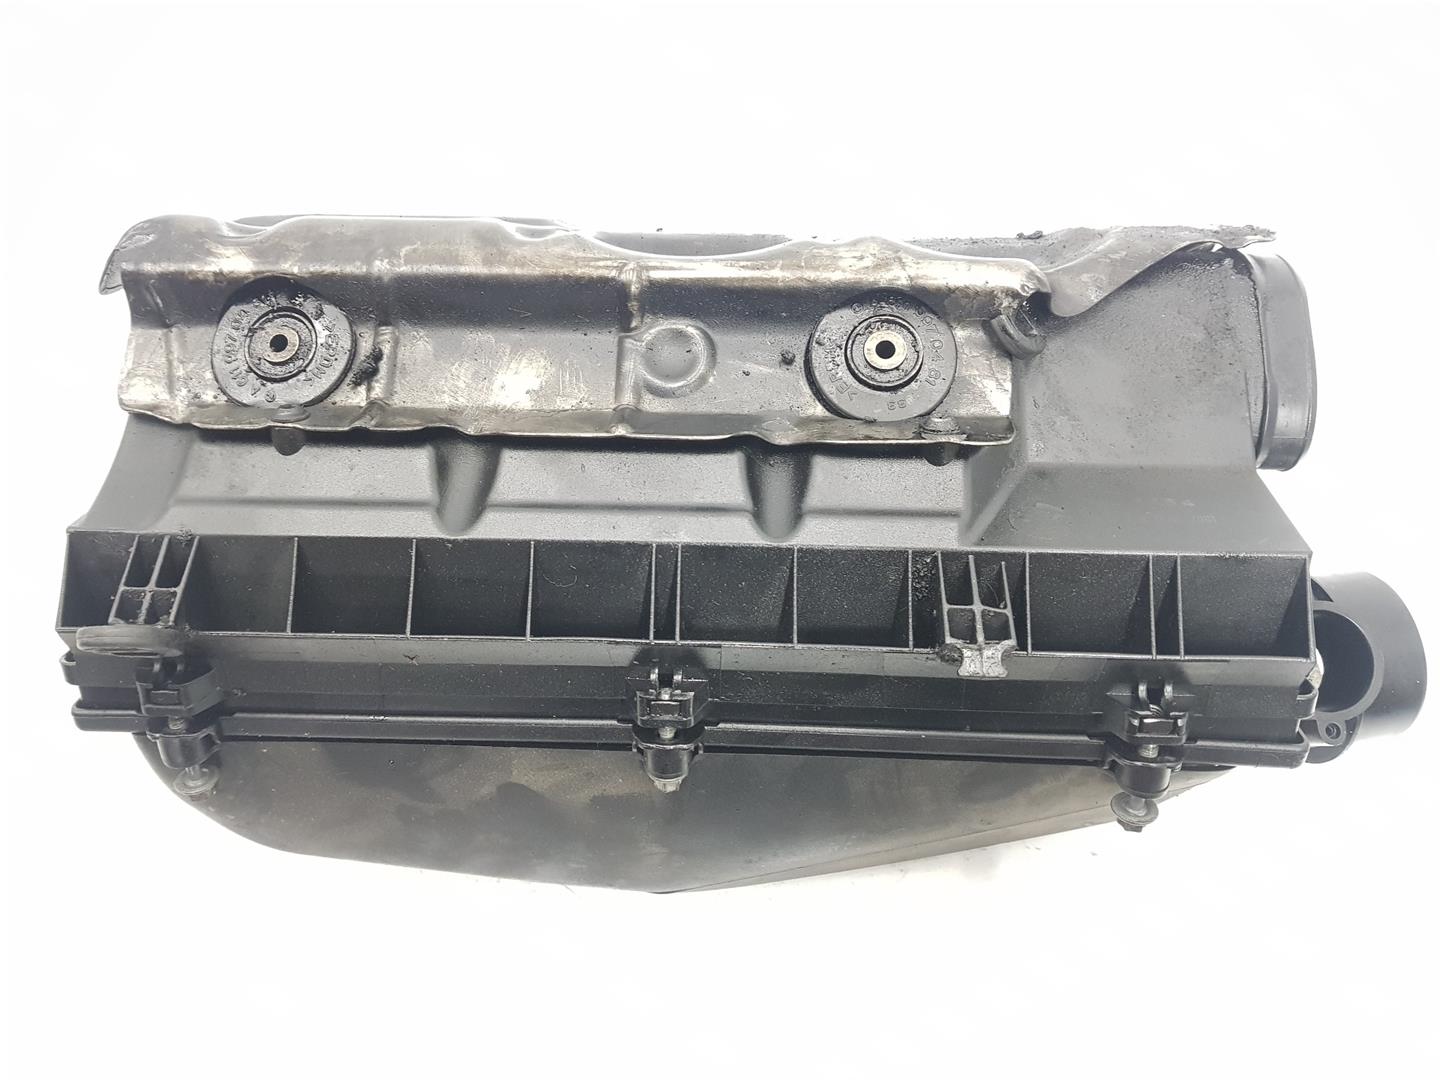 MERCEDES-BENZ C-Class W203/S203/CL203 (2000-2008) Other Engine Compartment Parts A6110900601, A6110900601, 1151CB 23748758